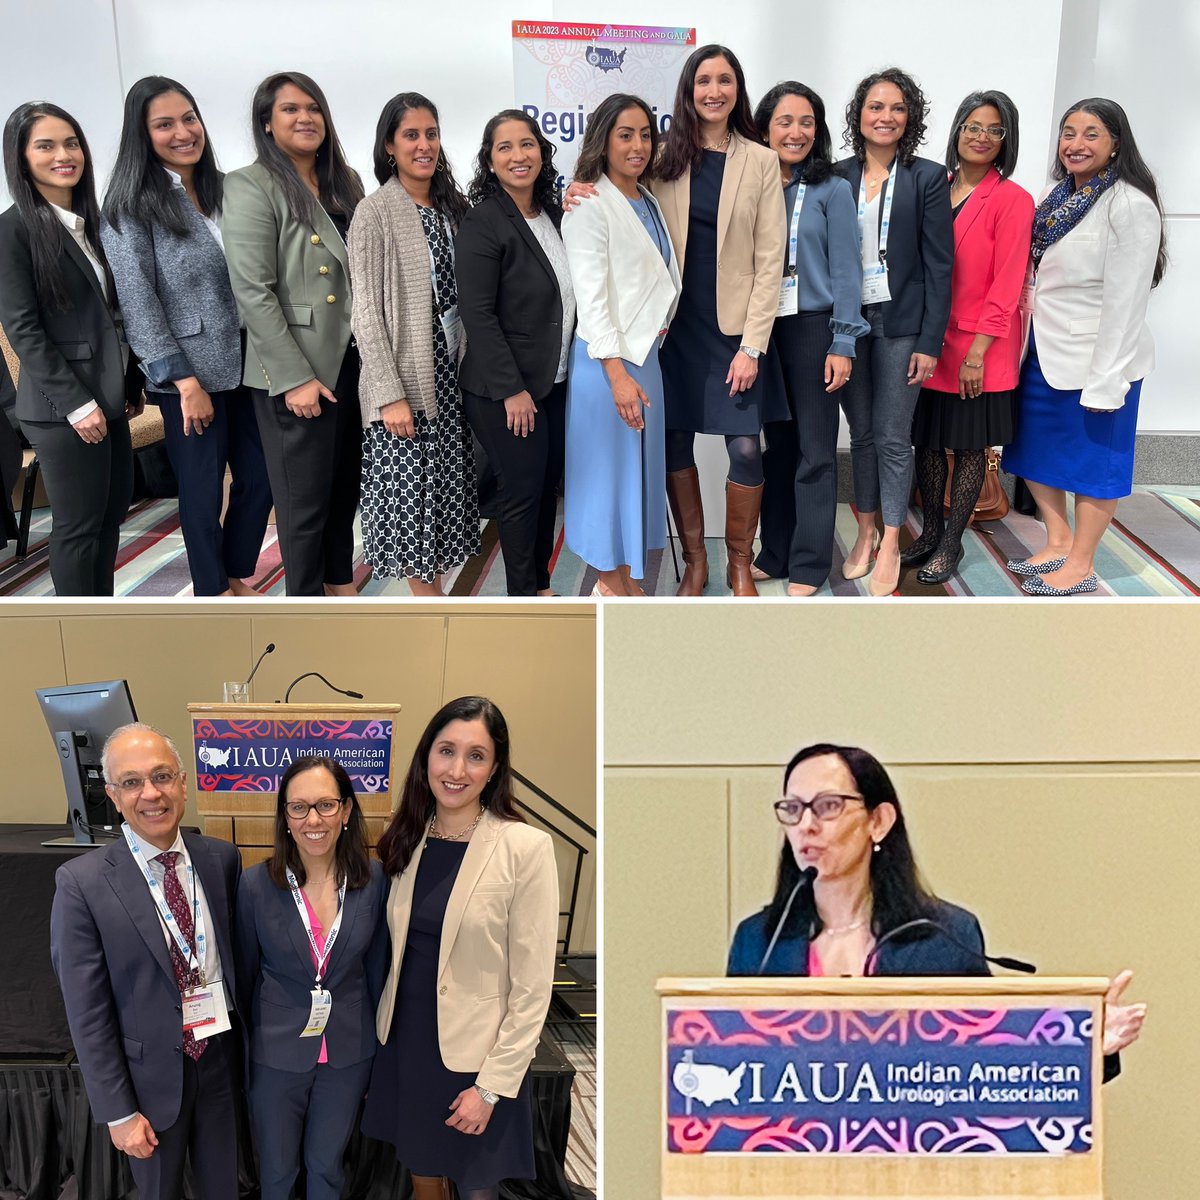 Grateful for the opportunity to share perspectives on innovation and partnering @IauaSociety Annual meeting. Thank you to Dr. Anurag Das, @PriyaPadmanabh6 and @raveensyan for putting together an engaging program. @MDTPelvicHealth